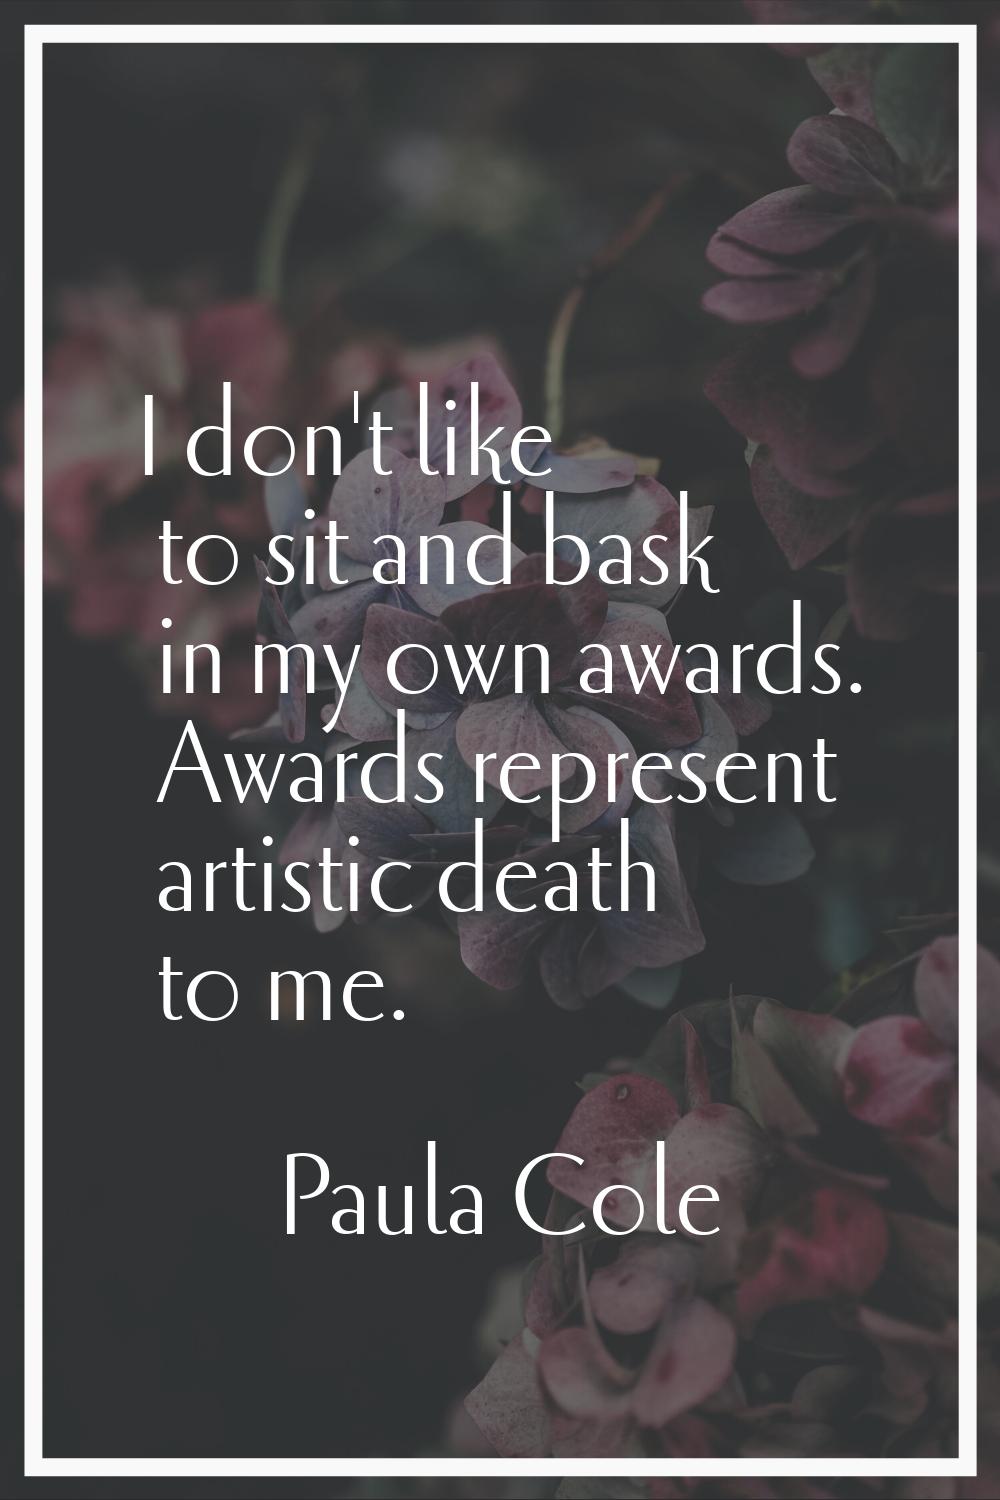 I don't like to sit and bask in my own awards. Awards represent artistic death to me.